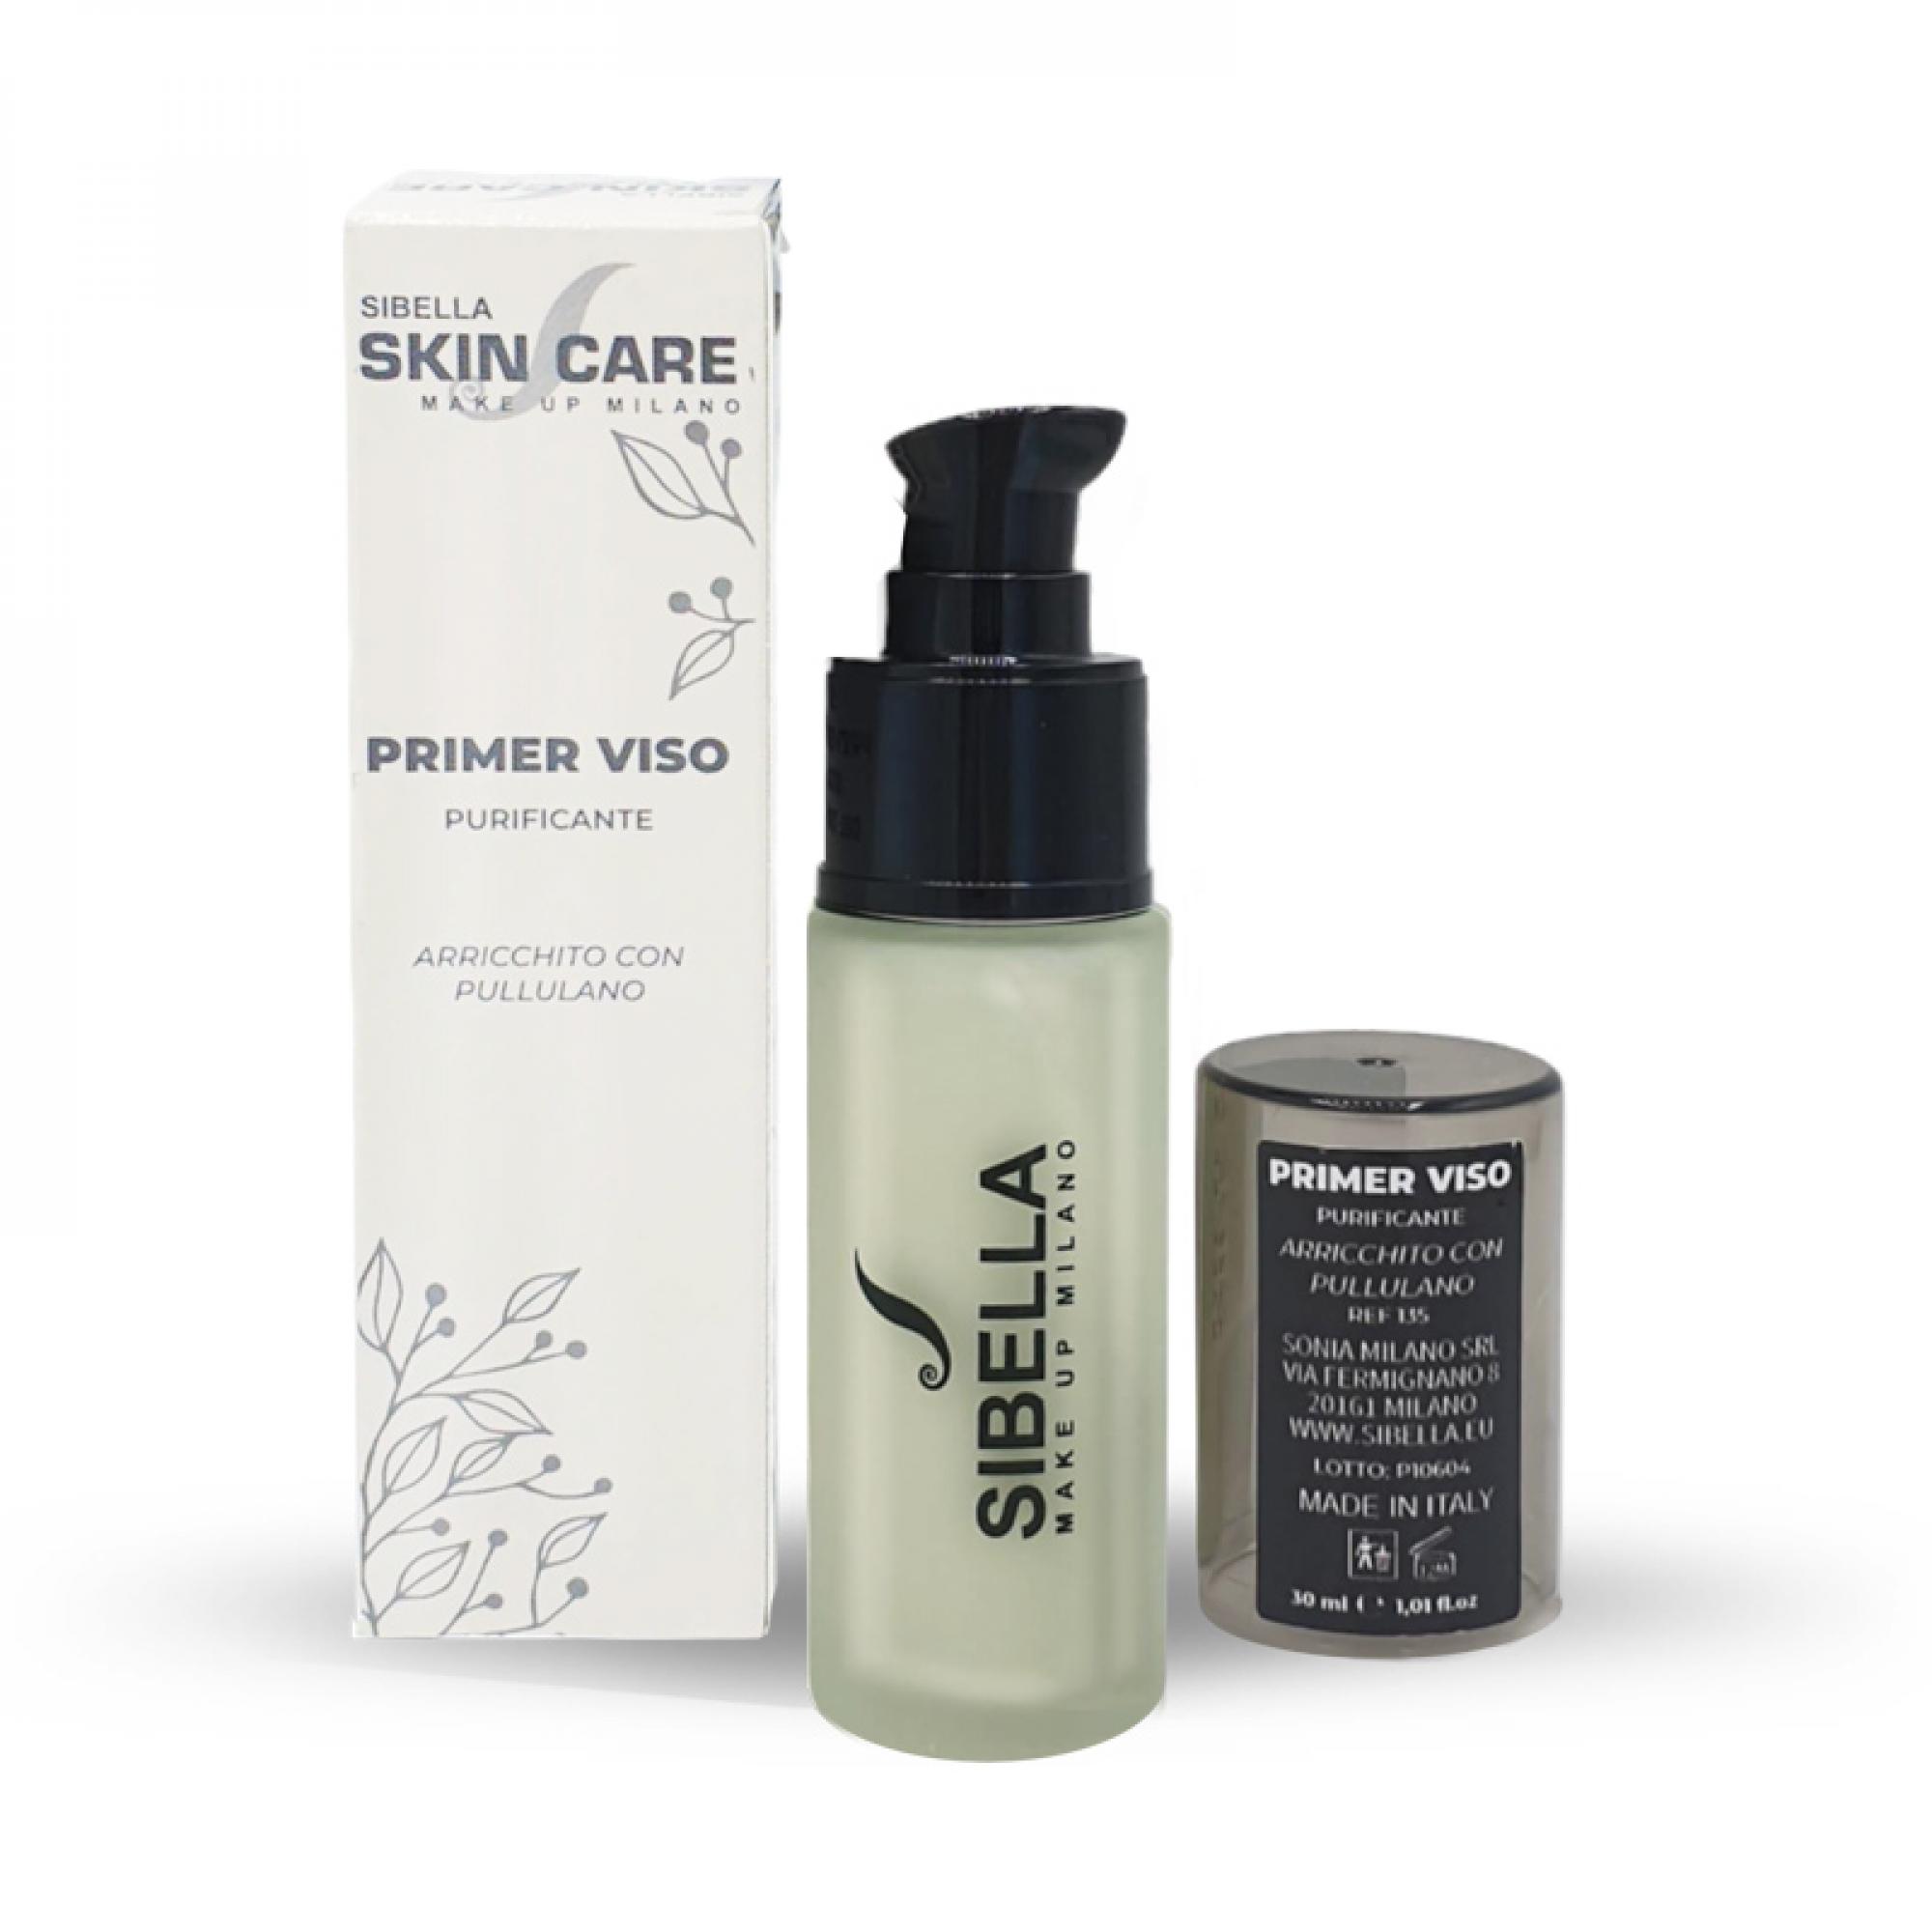 Primer viso purificante - 30Ml Made in Italy